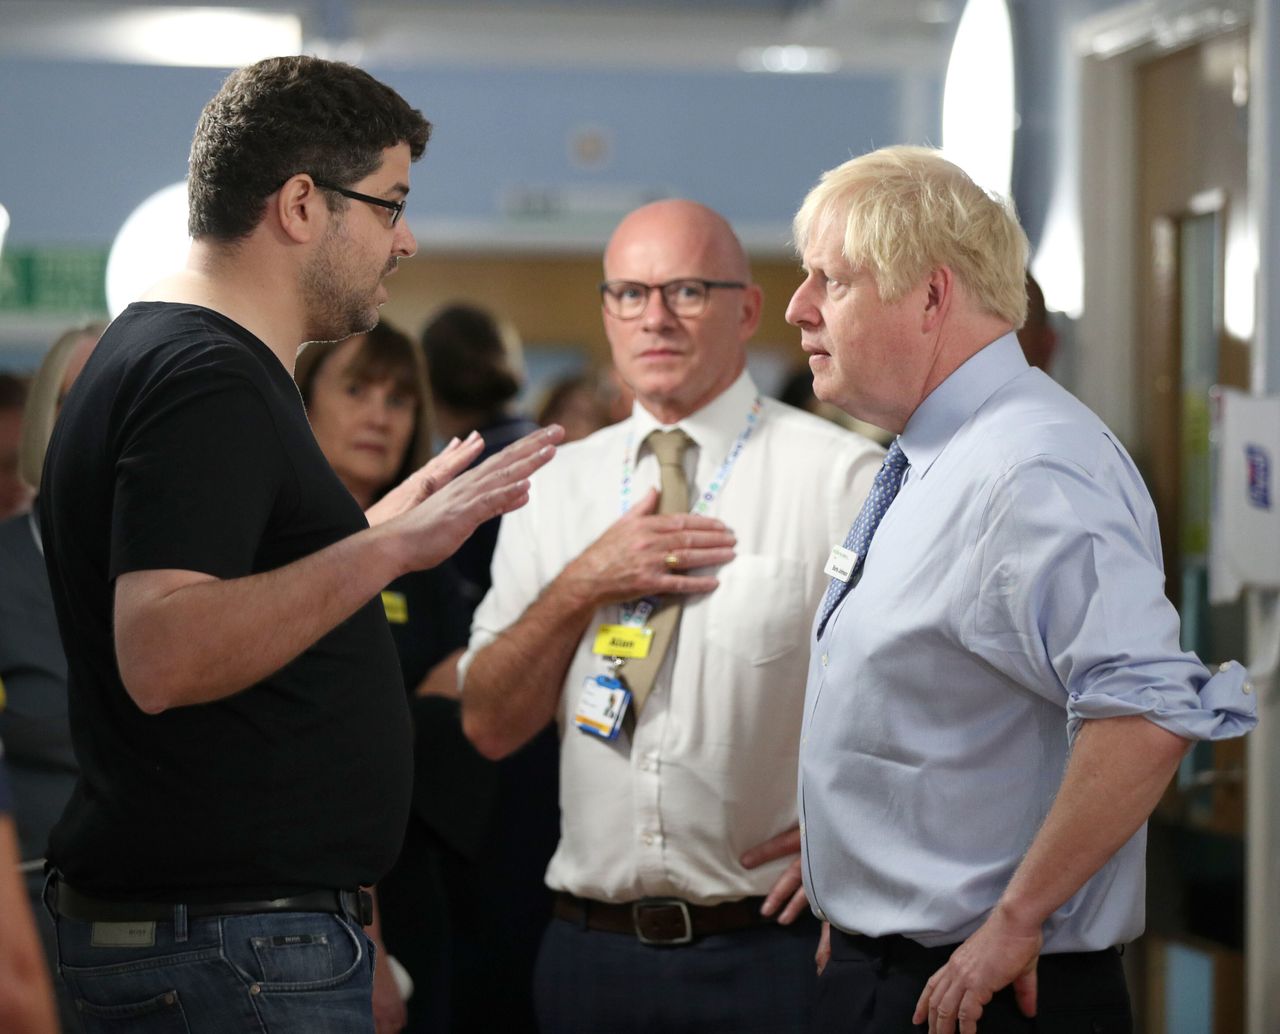 The father of a sick baby confronts Boris Johnson during a hospital visit in east London 